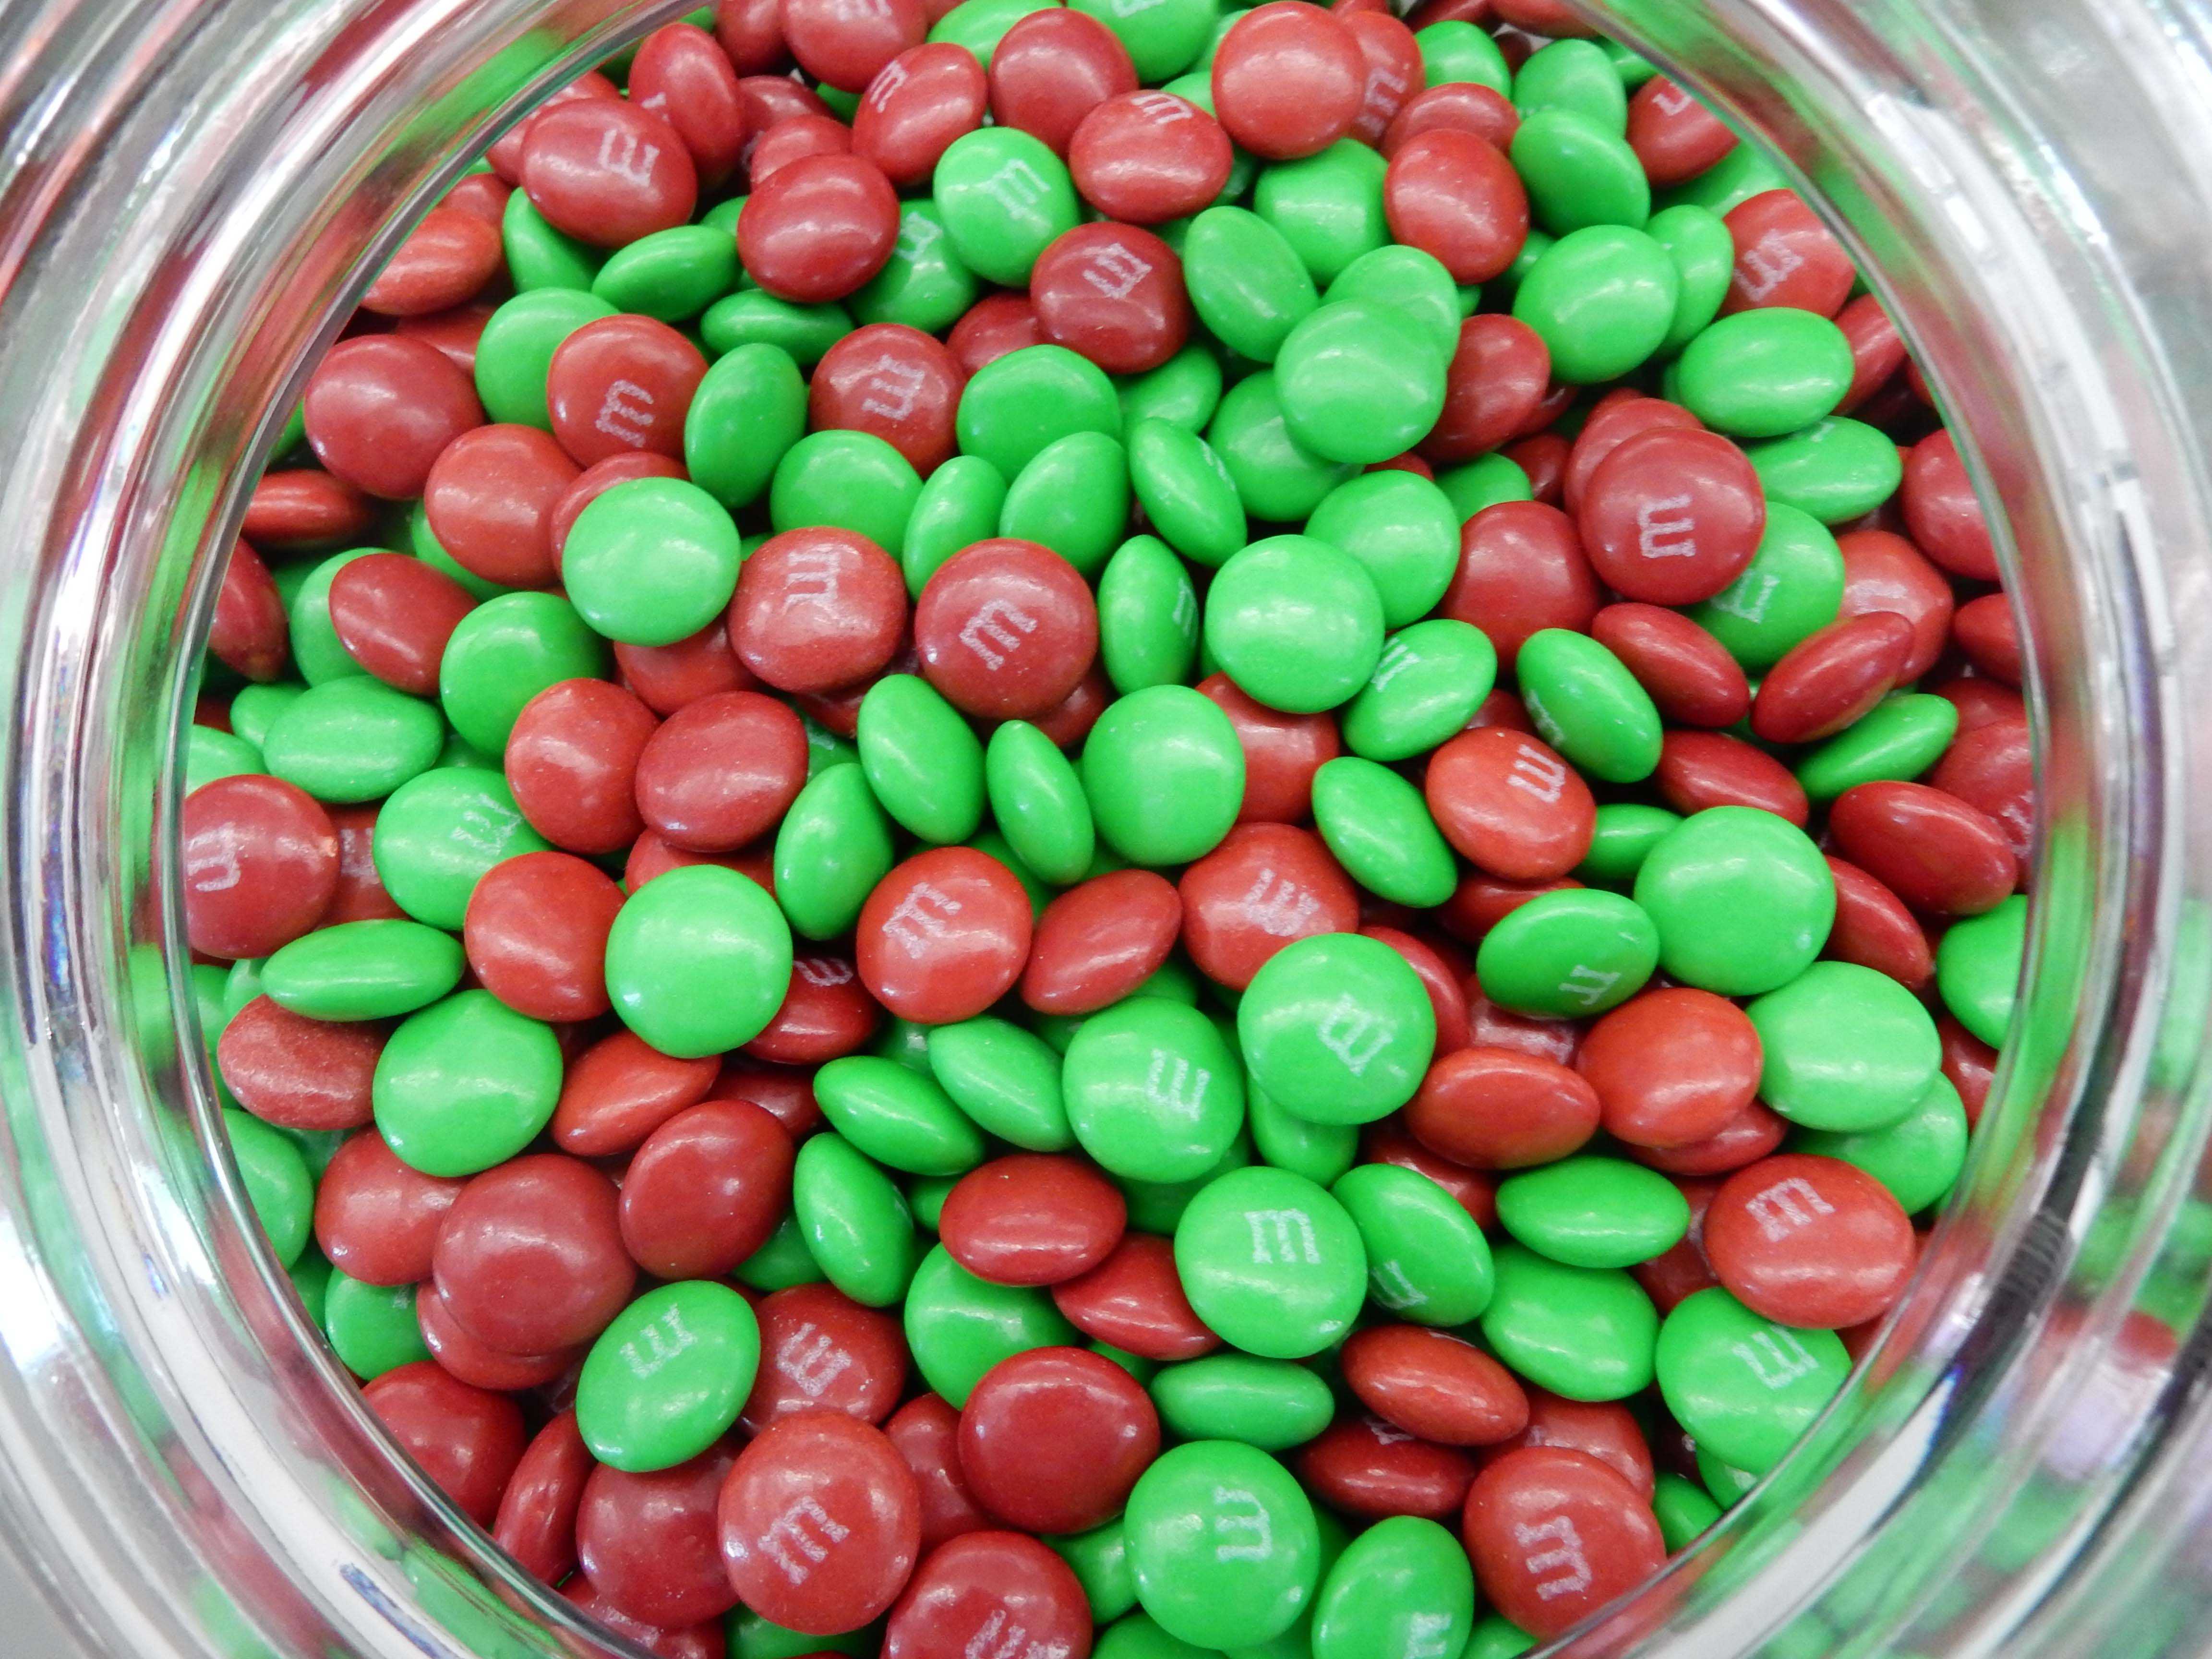 Contest! Win a Mountain of M&M’s. Simply guess how many M&Ms are in this jar! Mountaineer